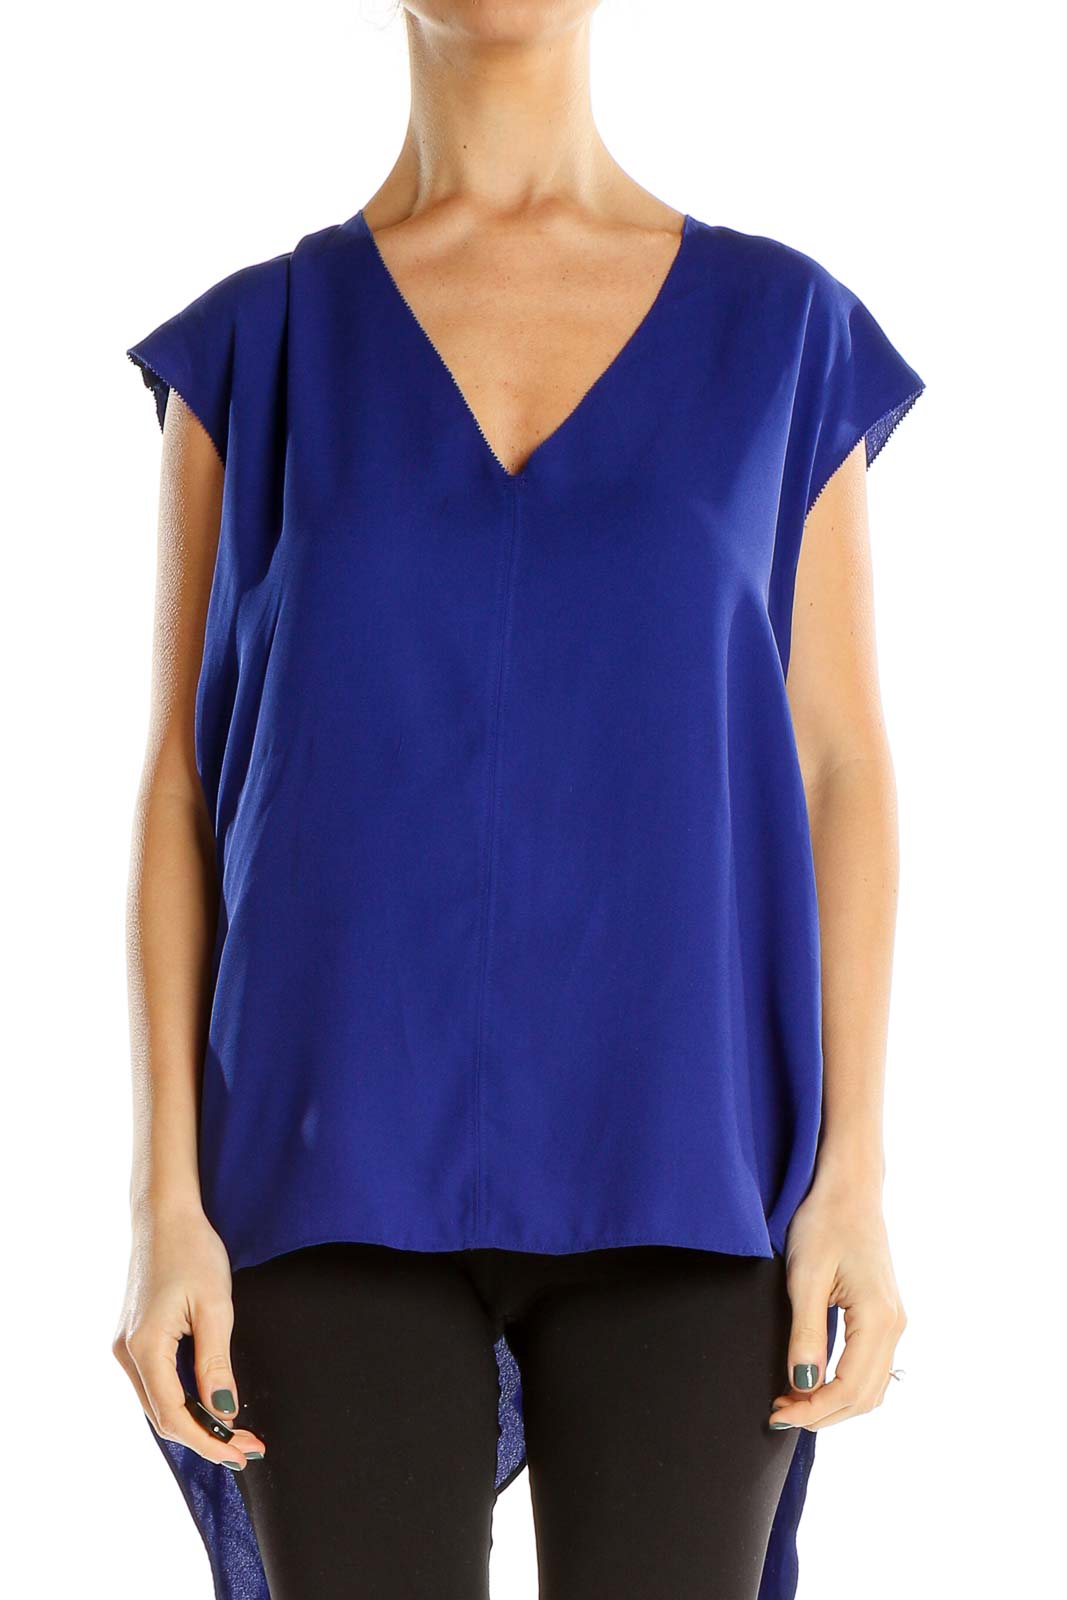 Blue High Low All Day Wear Blouse Front